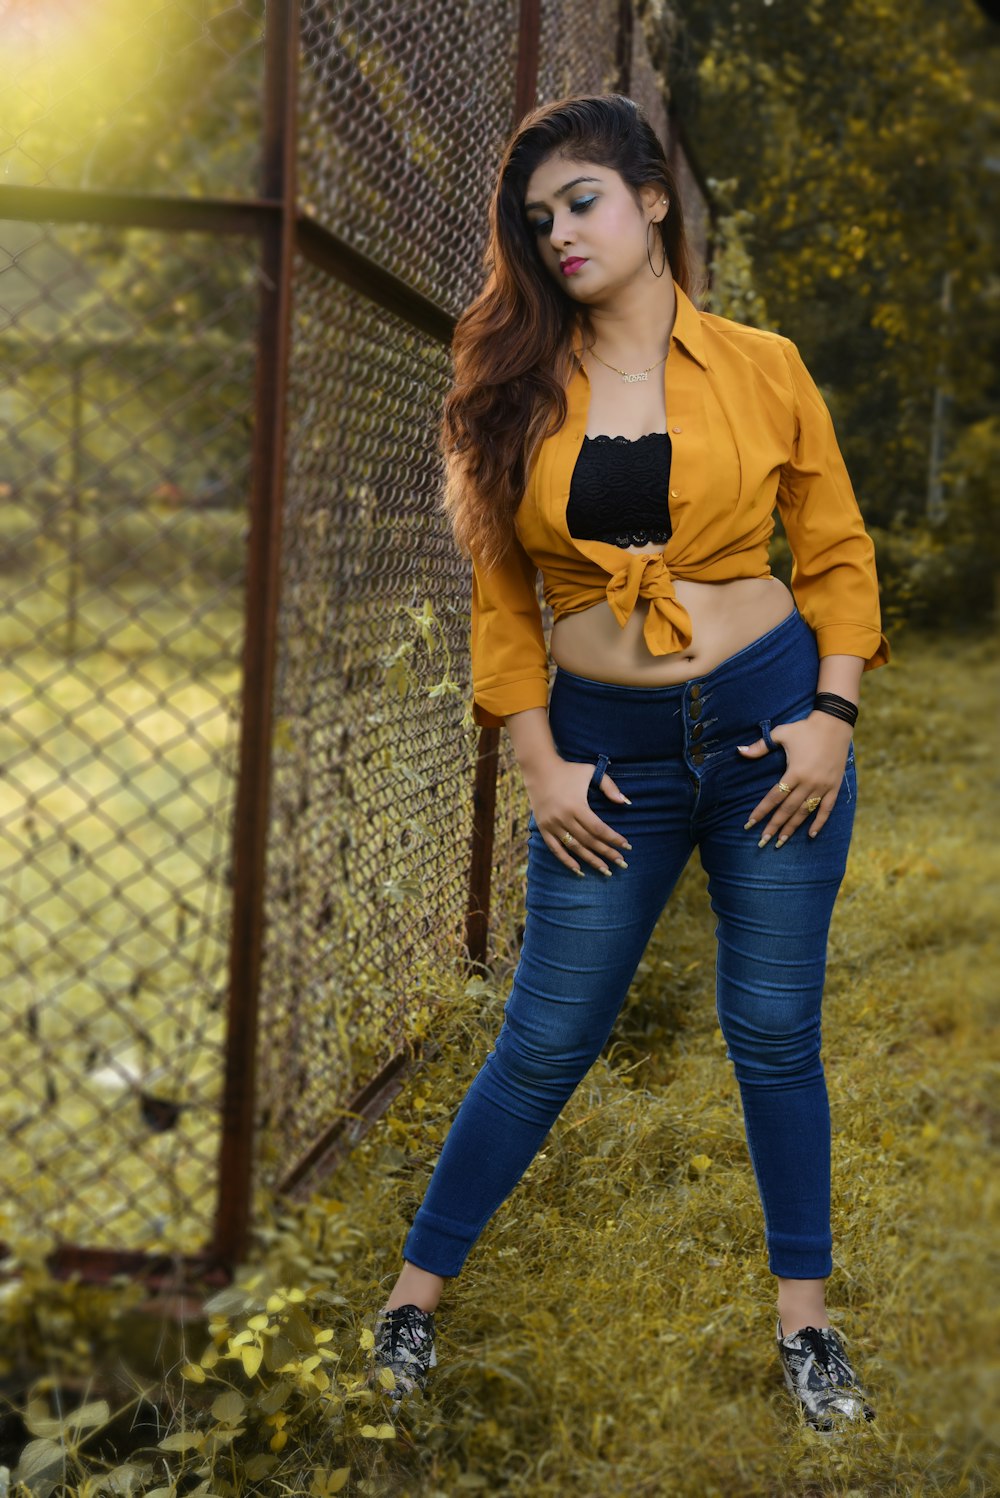 woman in yellow jacket and blue denim jeans leaning on chain link fence